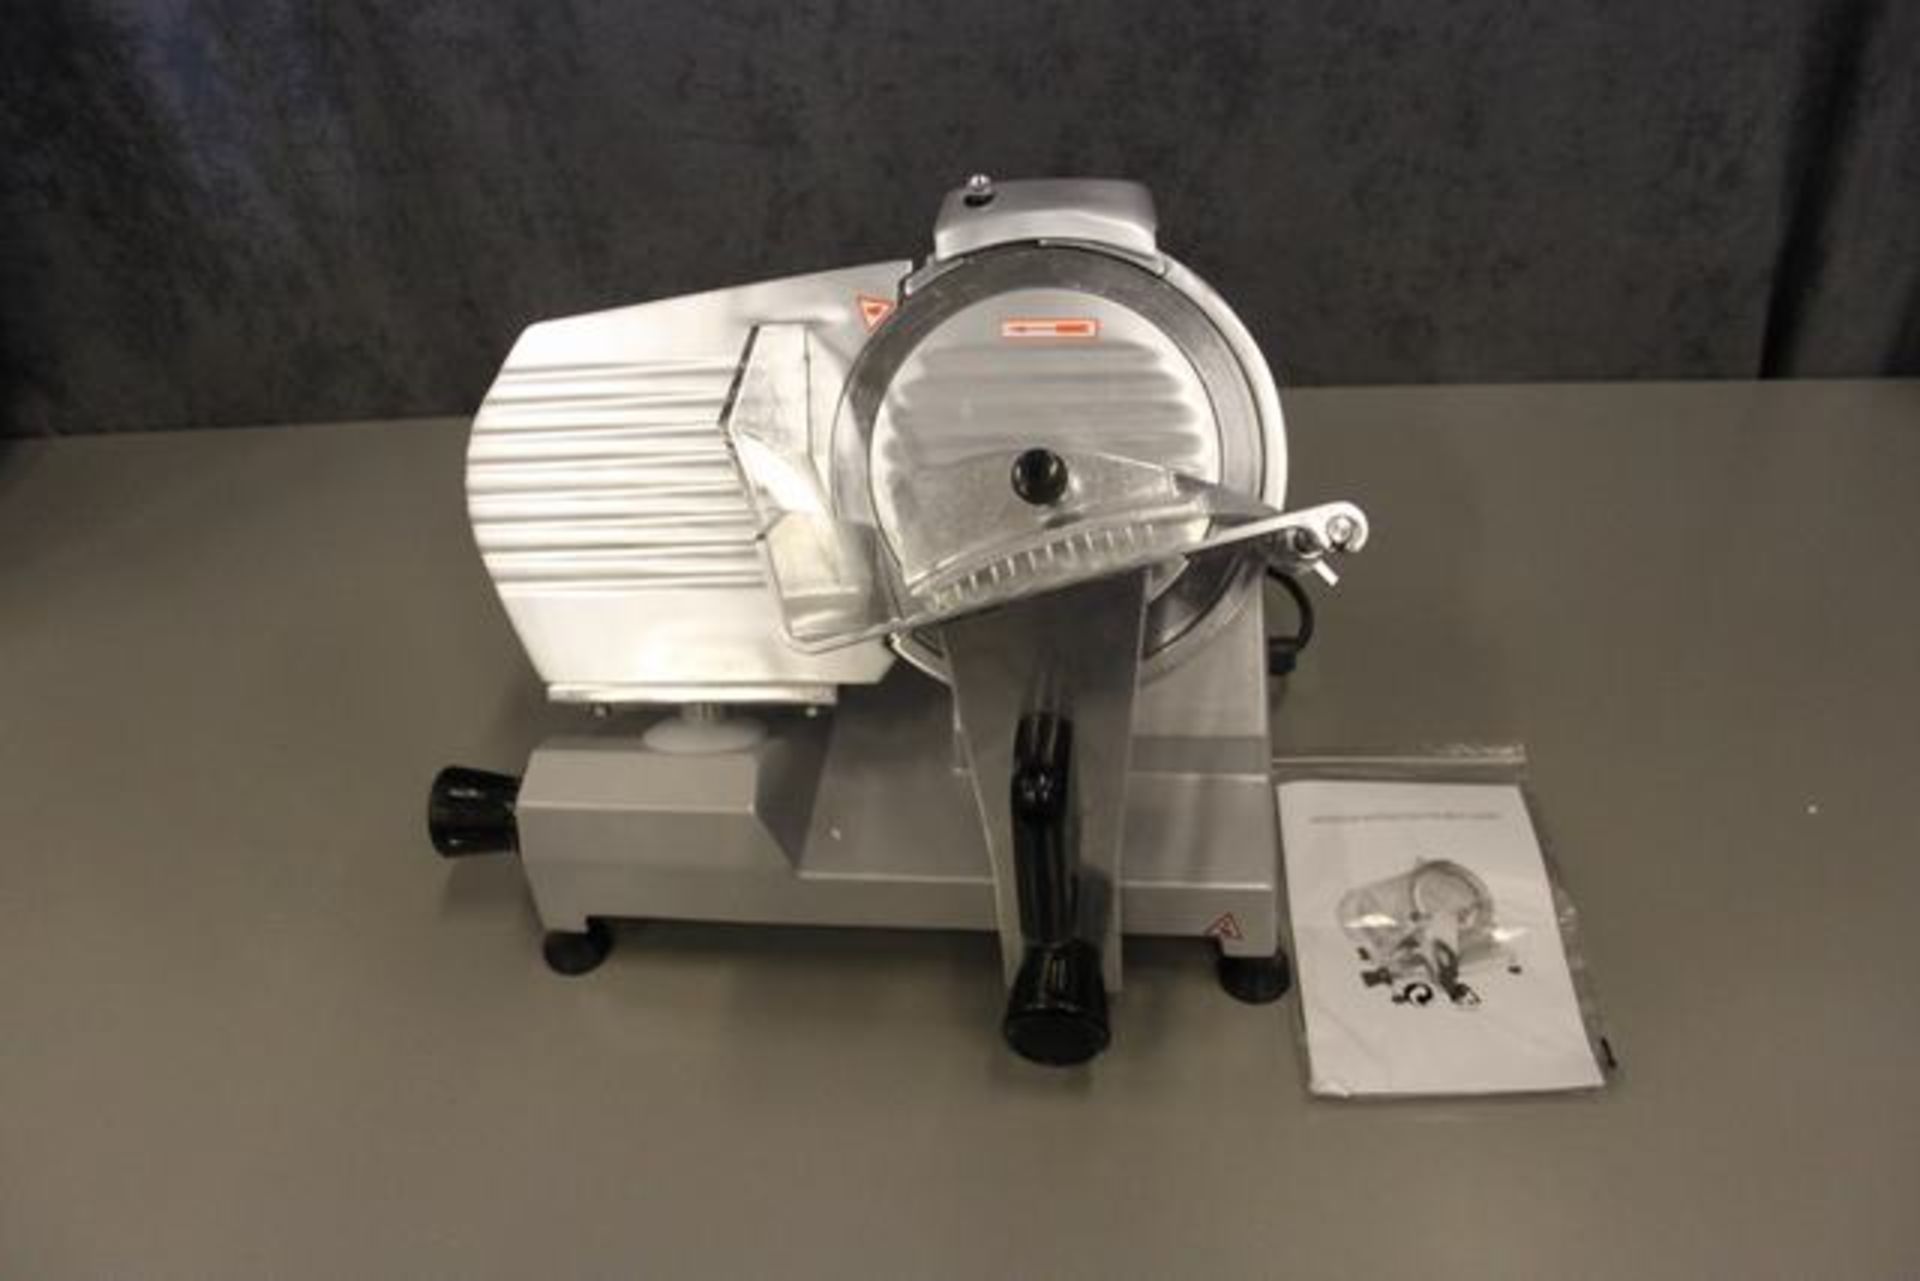 Gravity 220S Automatic Meat Slicer - a high quality gravity feed slicer with a chromed steel blade